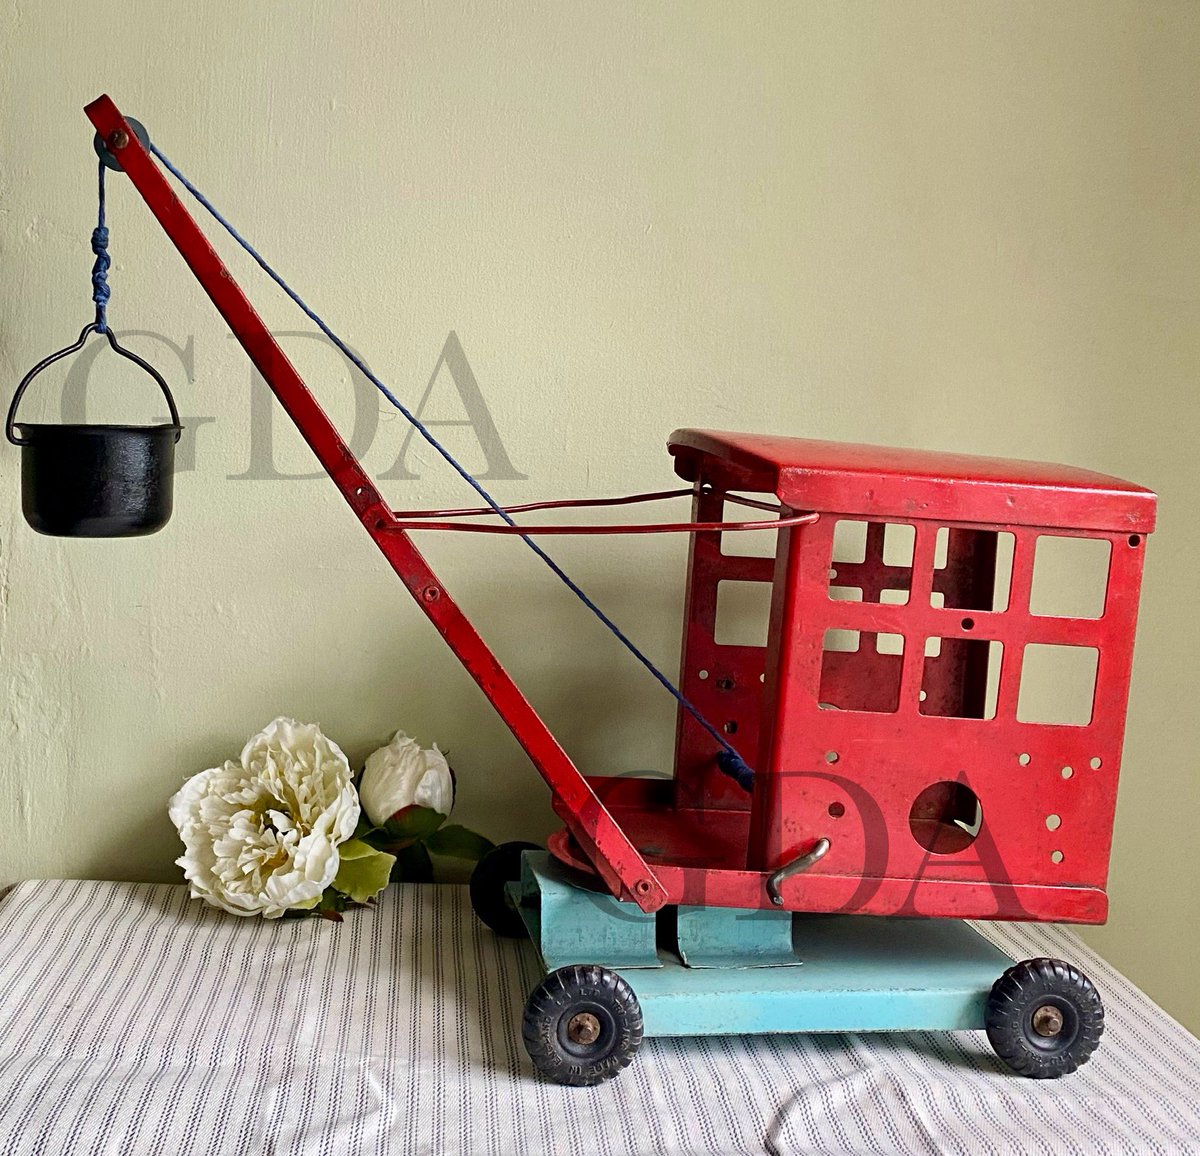 Good morning #earlybiz
New item ♥️
1950s Tri-Ang working toy crane. 
See it and more at,
Dieudonneart.com/antiques

#elevenseshour #red #vintagetoys #toys #collectables #antiques #shopindie #uniquegifts #nostalgia #bizhour